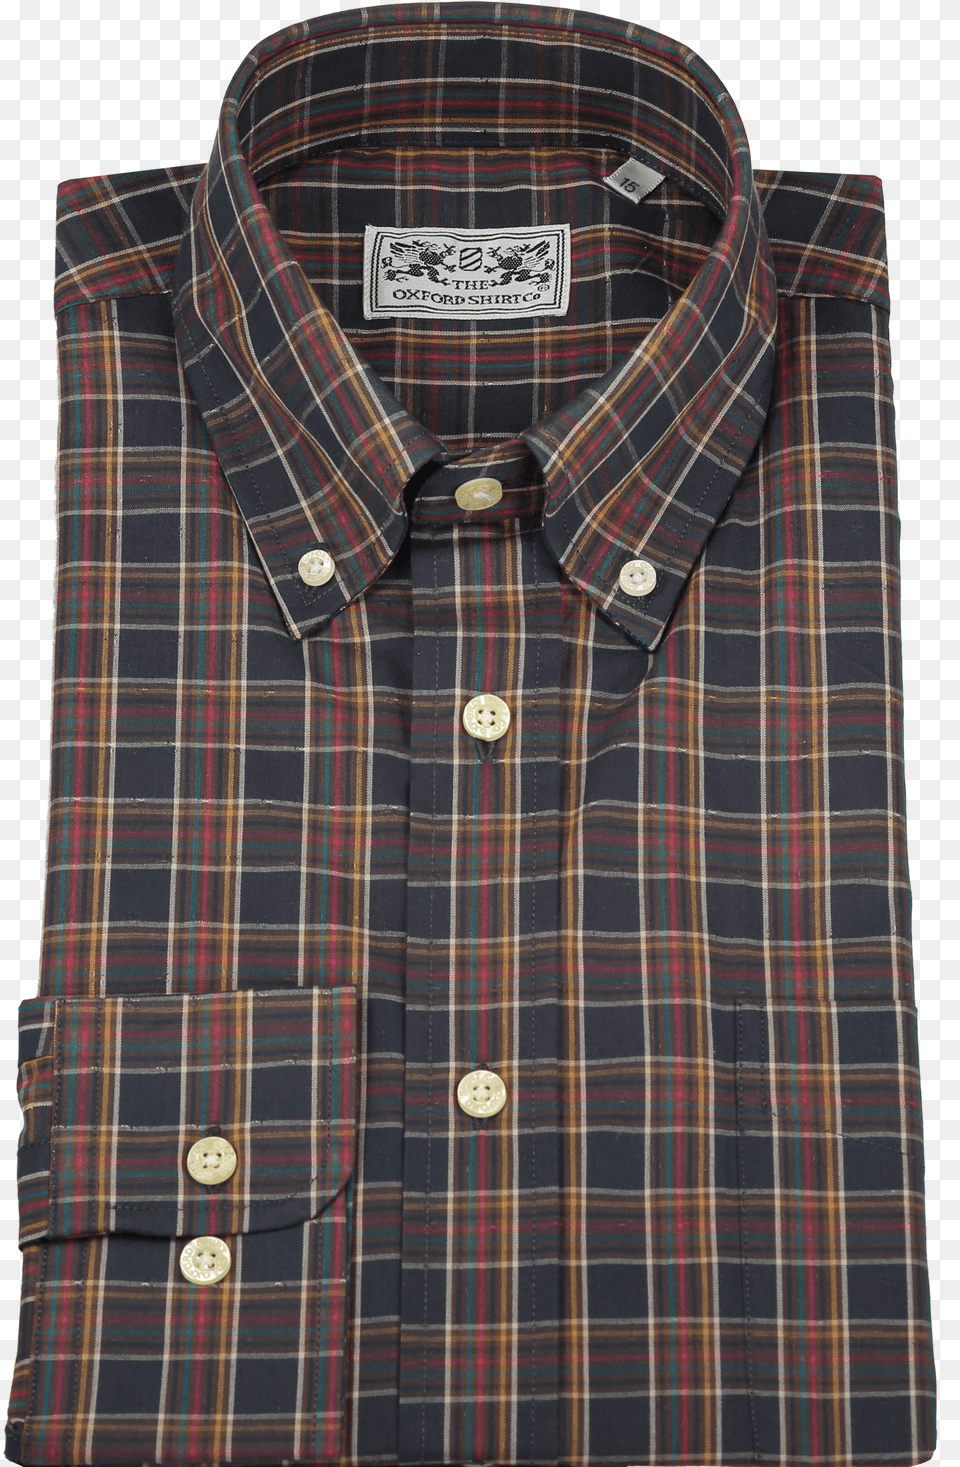 Mens Button Down Shirt Classic Style In Dark Check Plaid Free Png